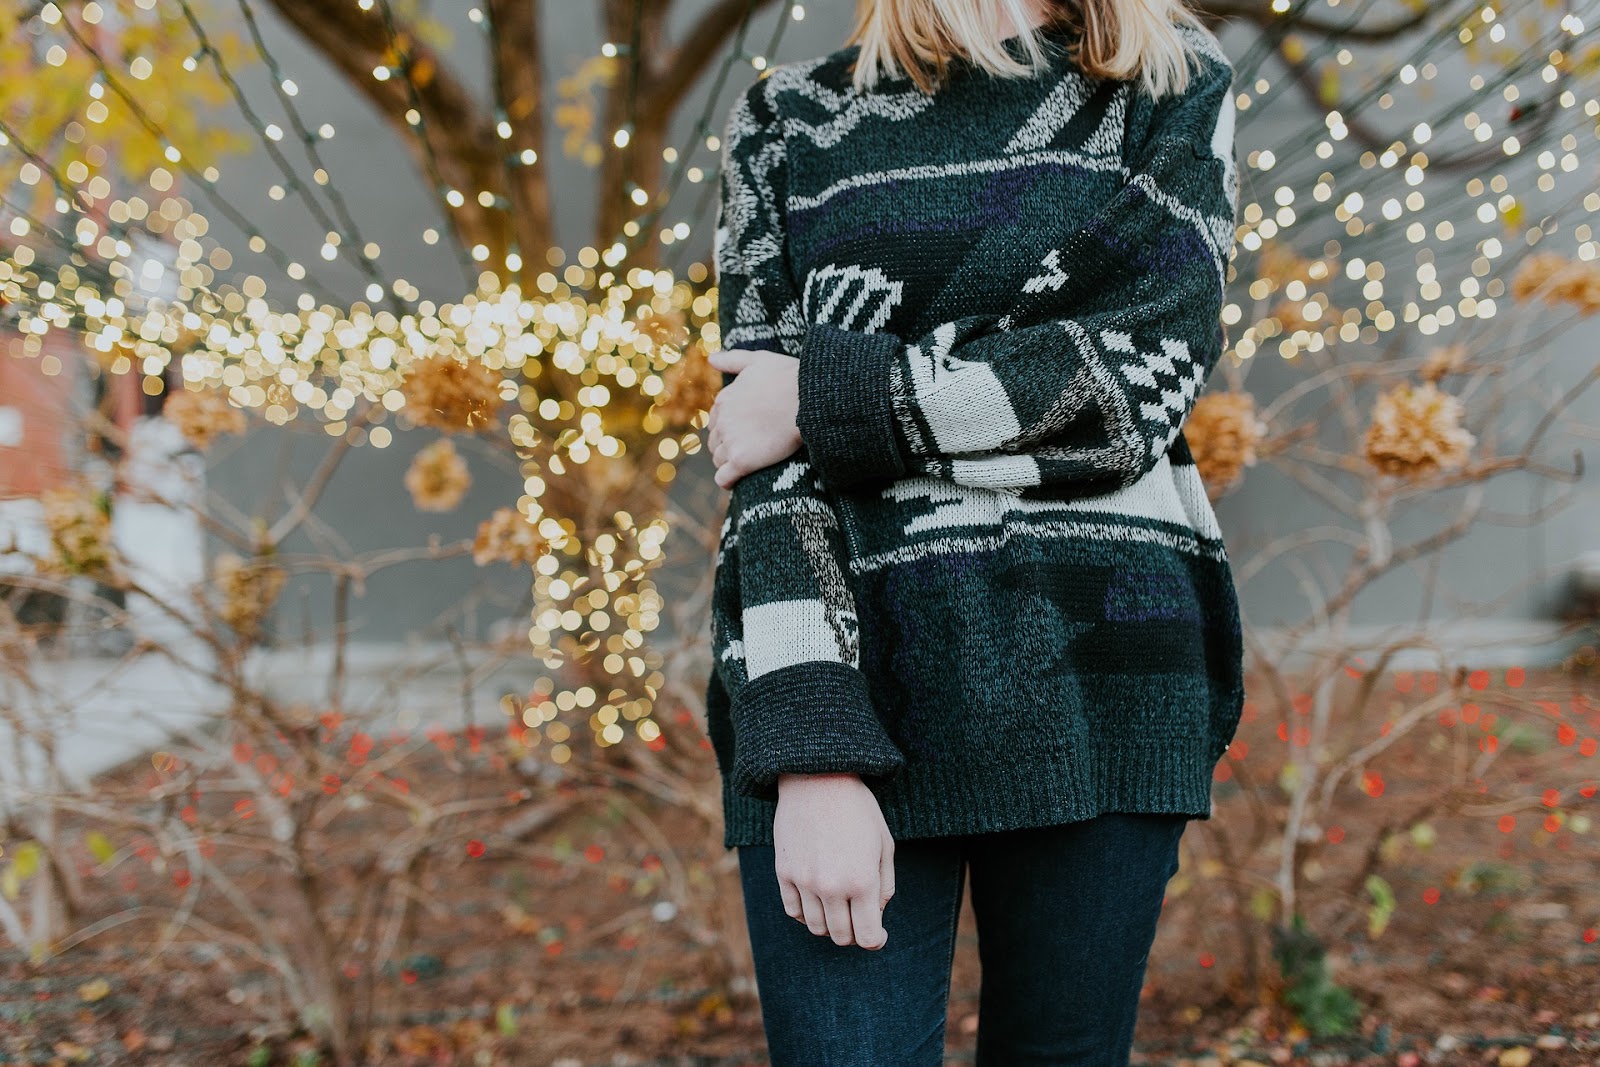 Sweater as Christmas gift for bride to be